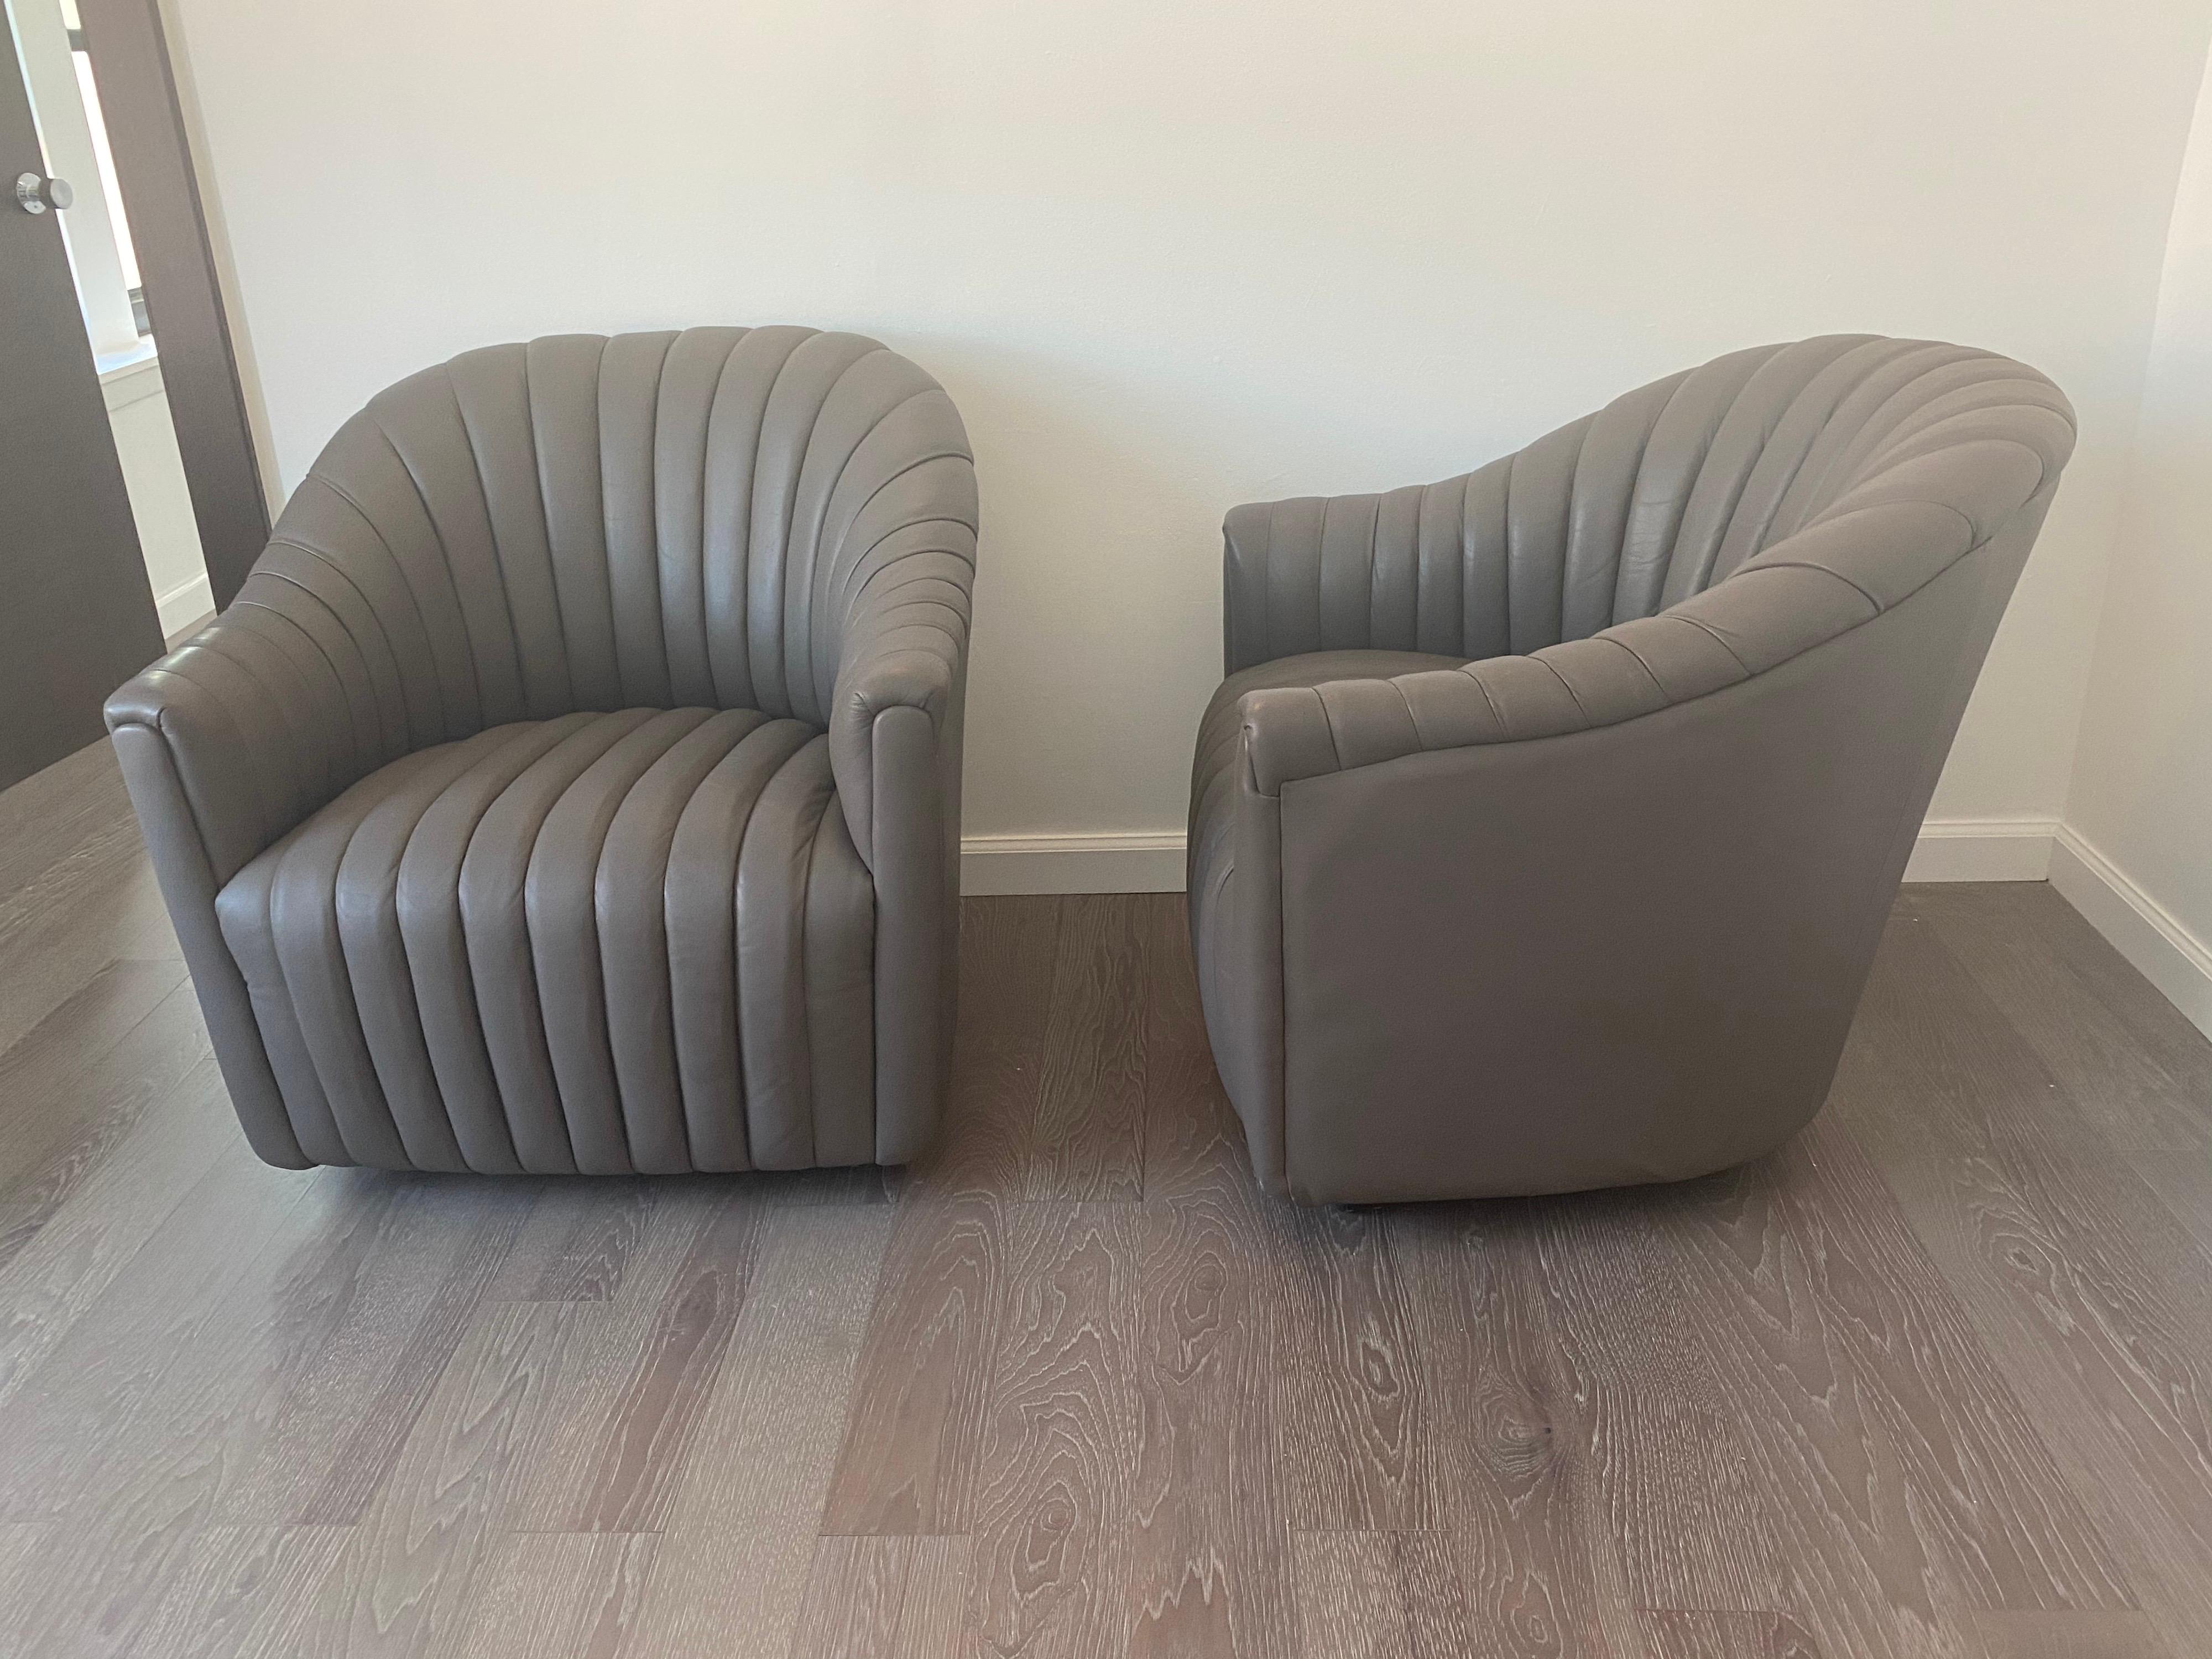 Ward Bennett Channel Club Leather Chairs, 1970s For Sale 1